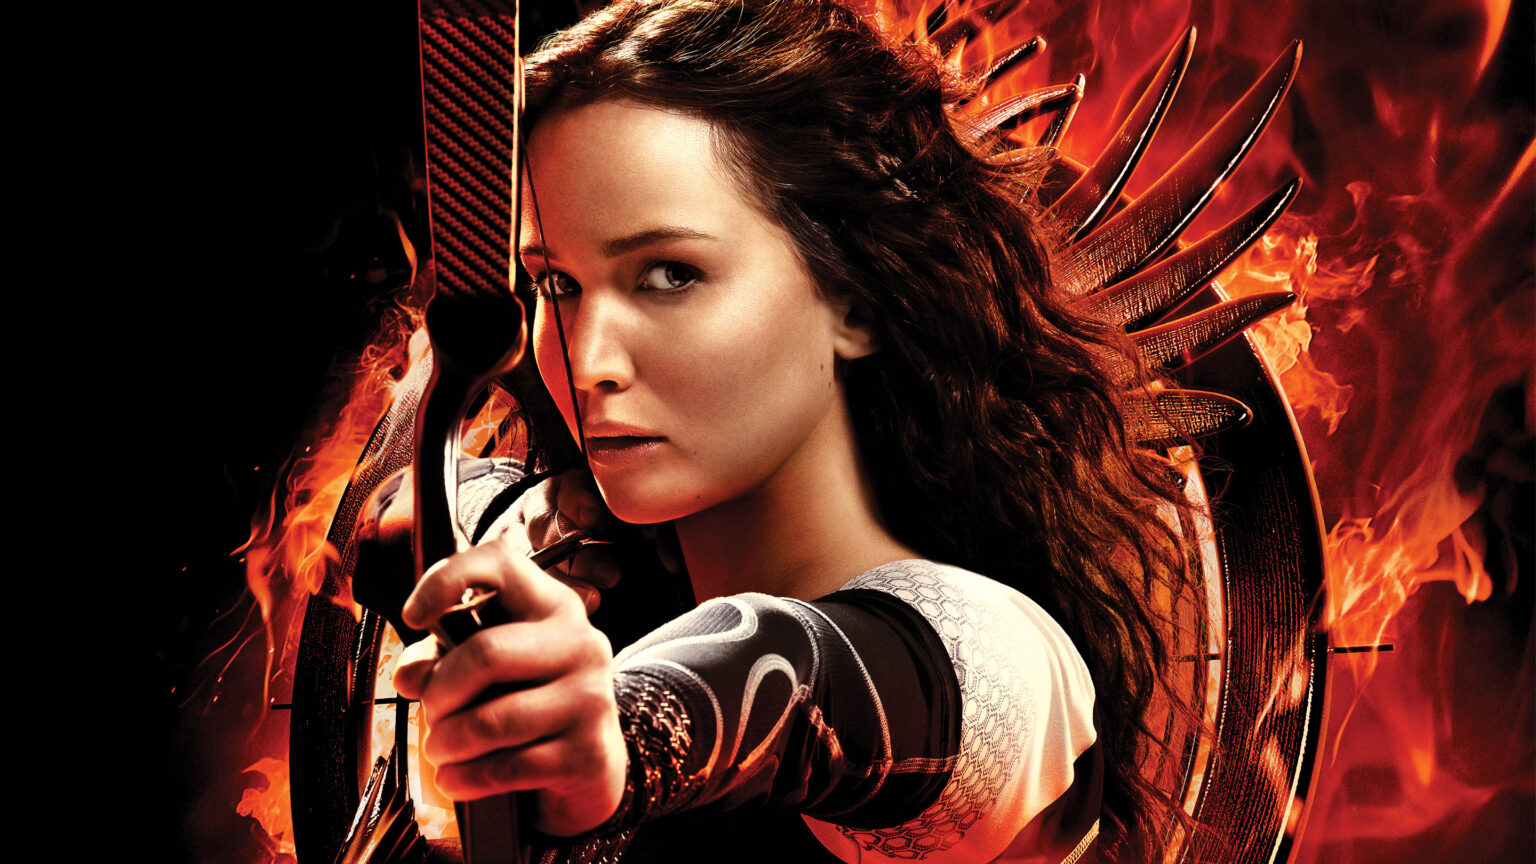 Fans of Jennifer Lawrence’s portrayal of Katniss Everdeen in The Hunger Gam...